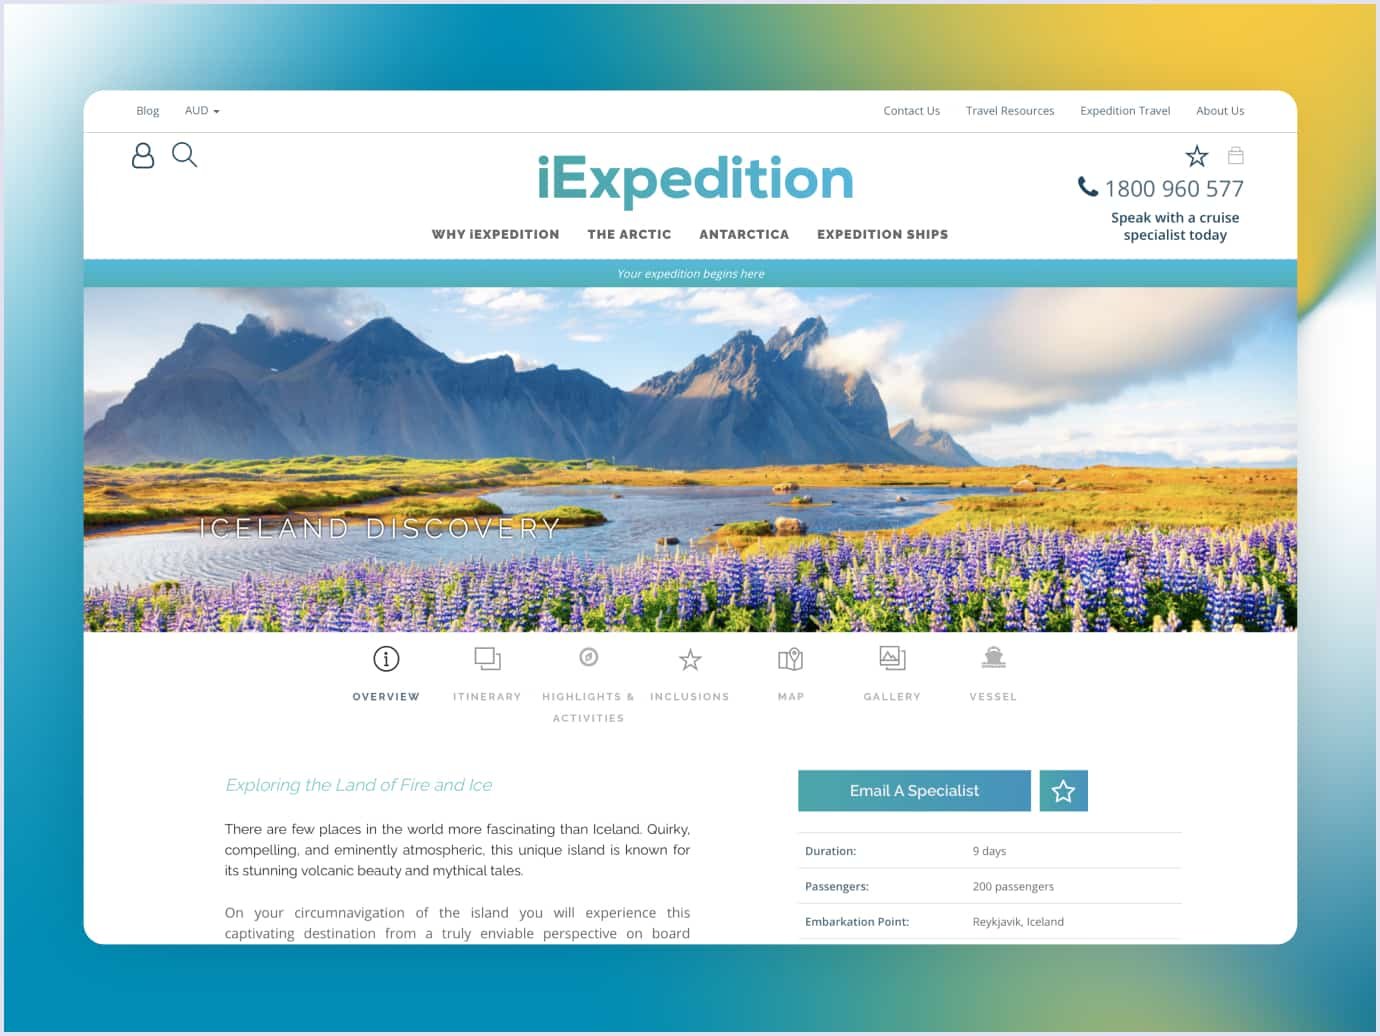 iExpedition online travel marketplace